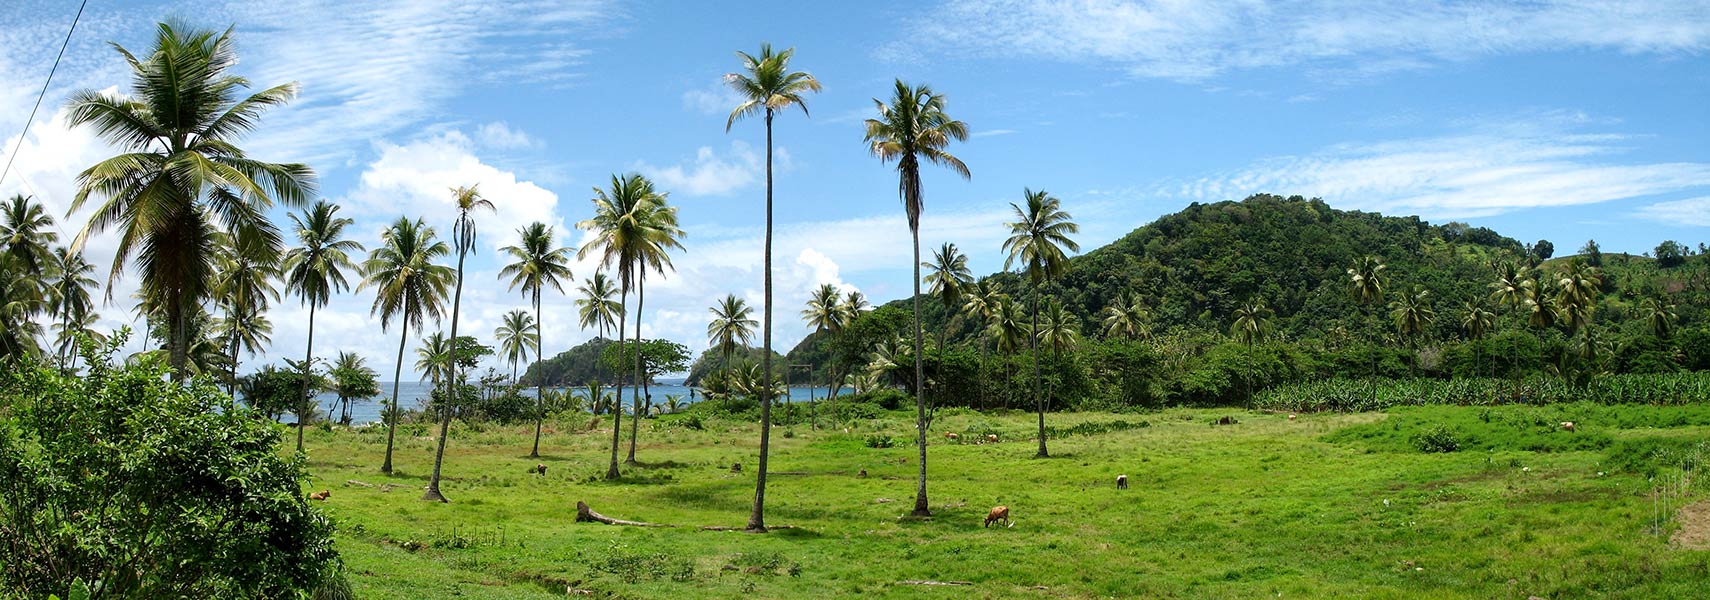 typical Dominica landscape panorama